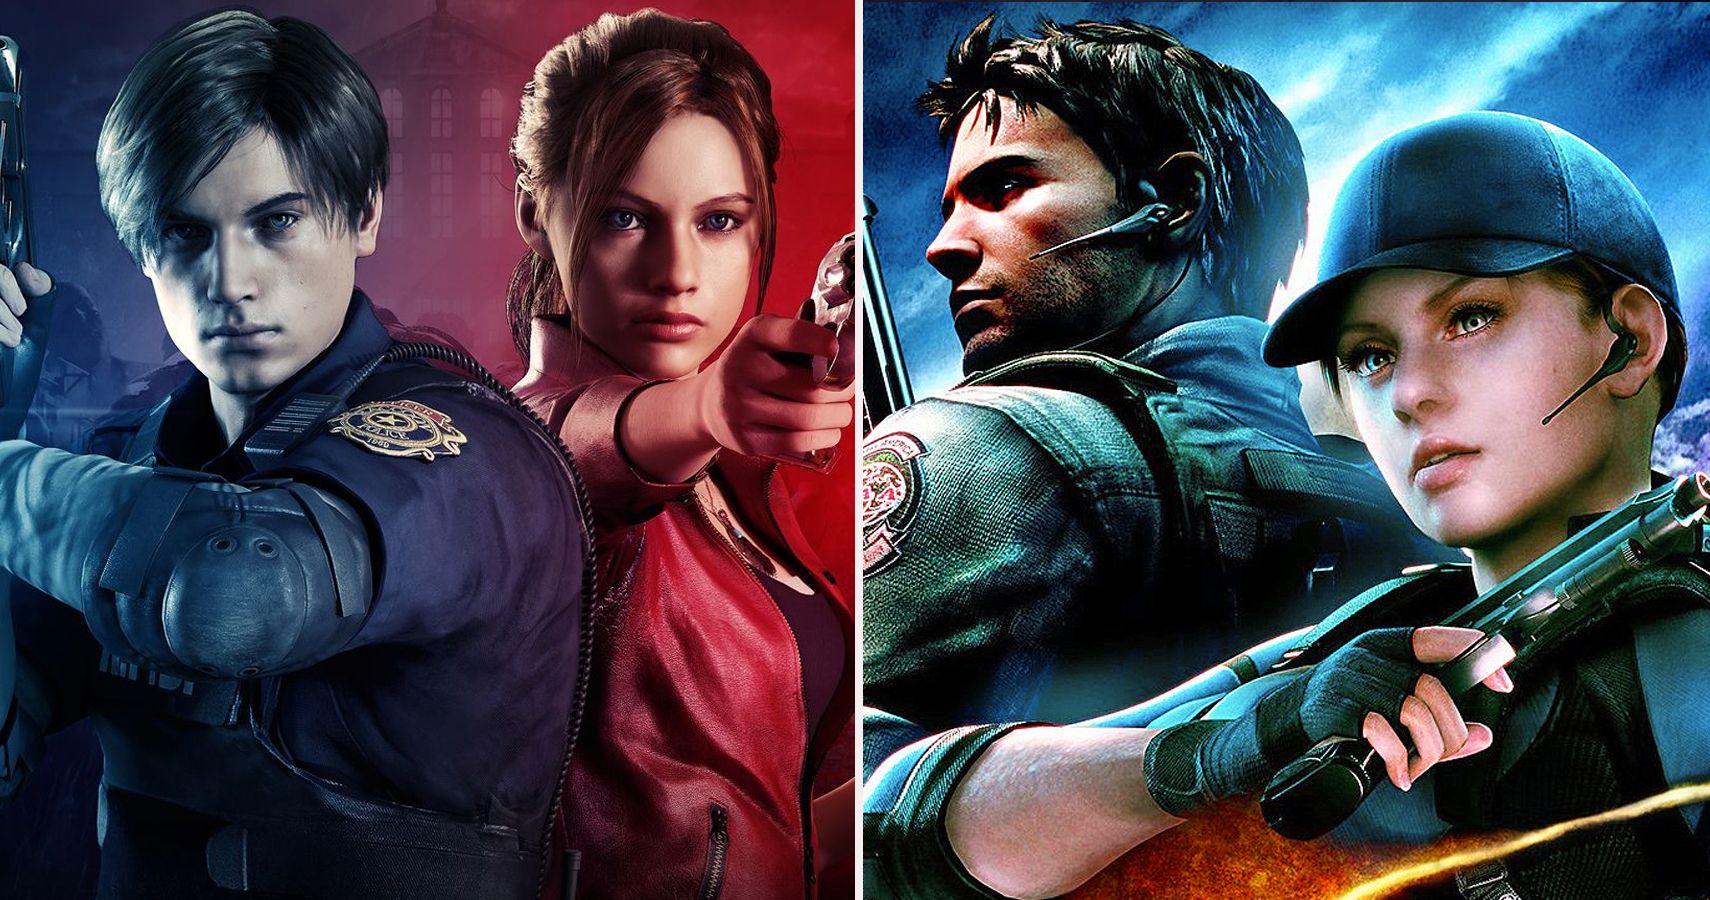 Every Game In The Resident Evil Series Ranked On Campaign Length (& How